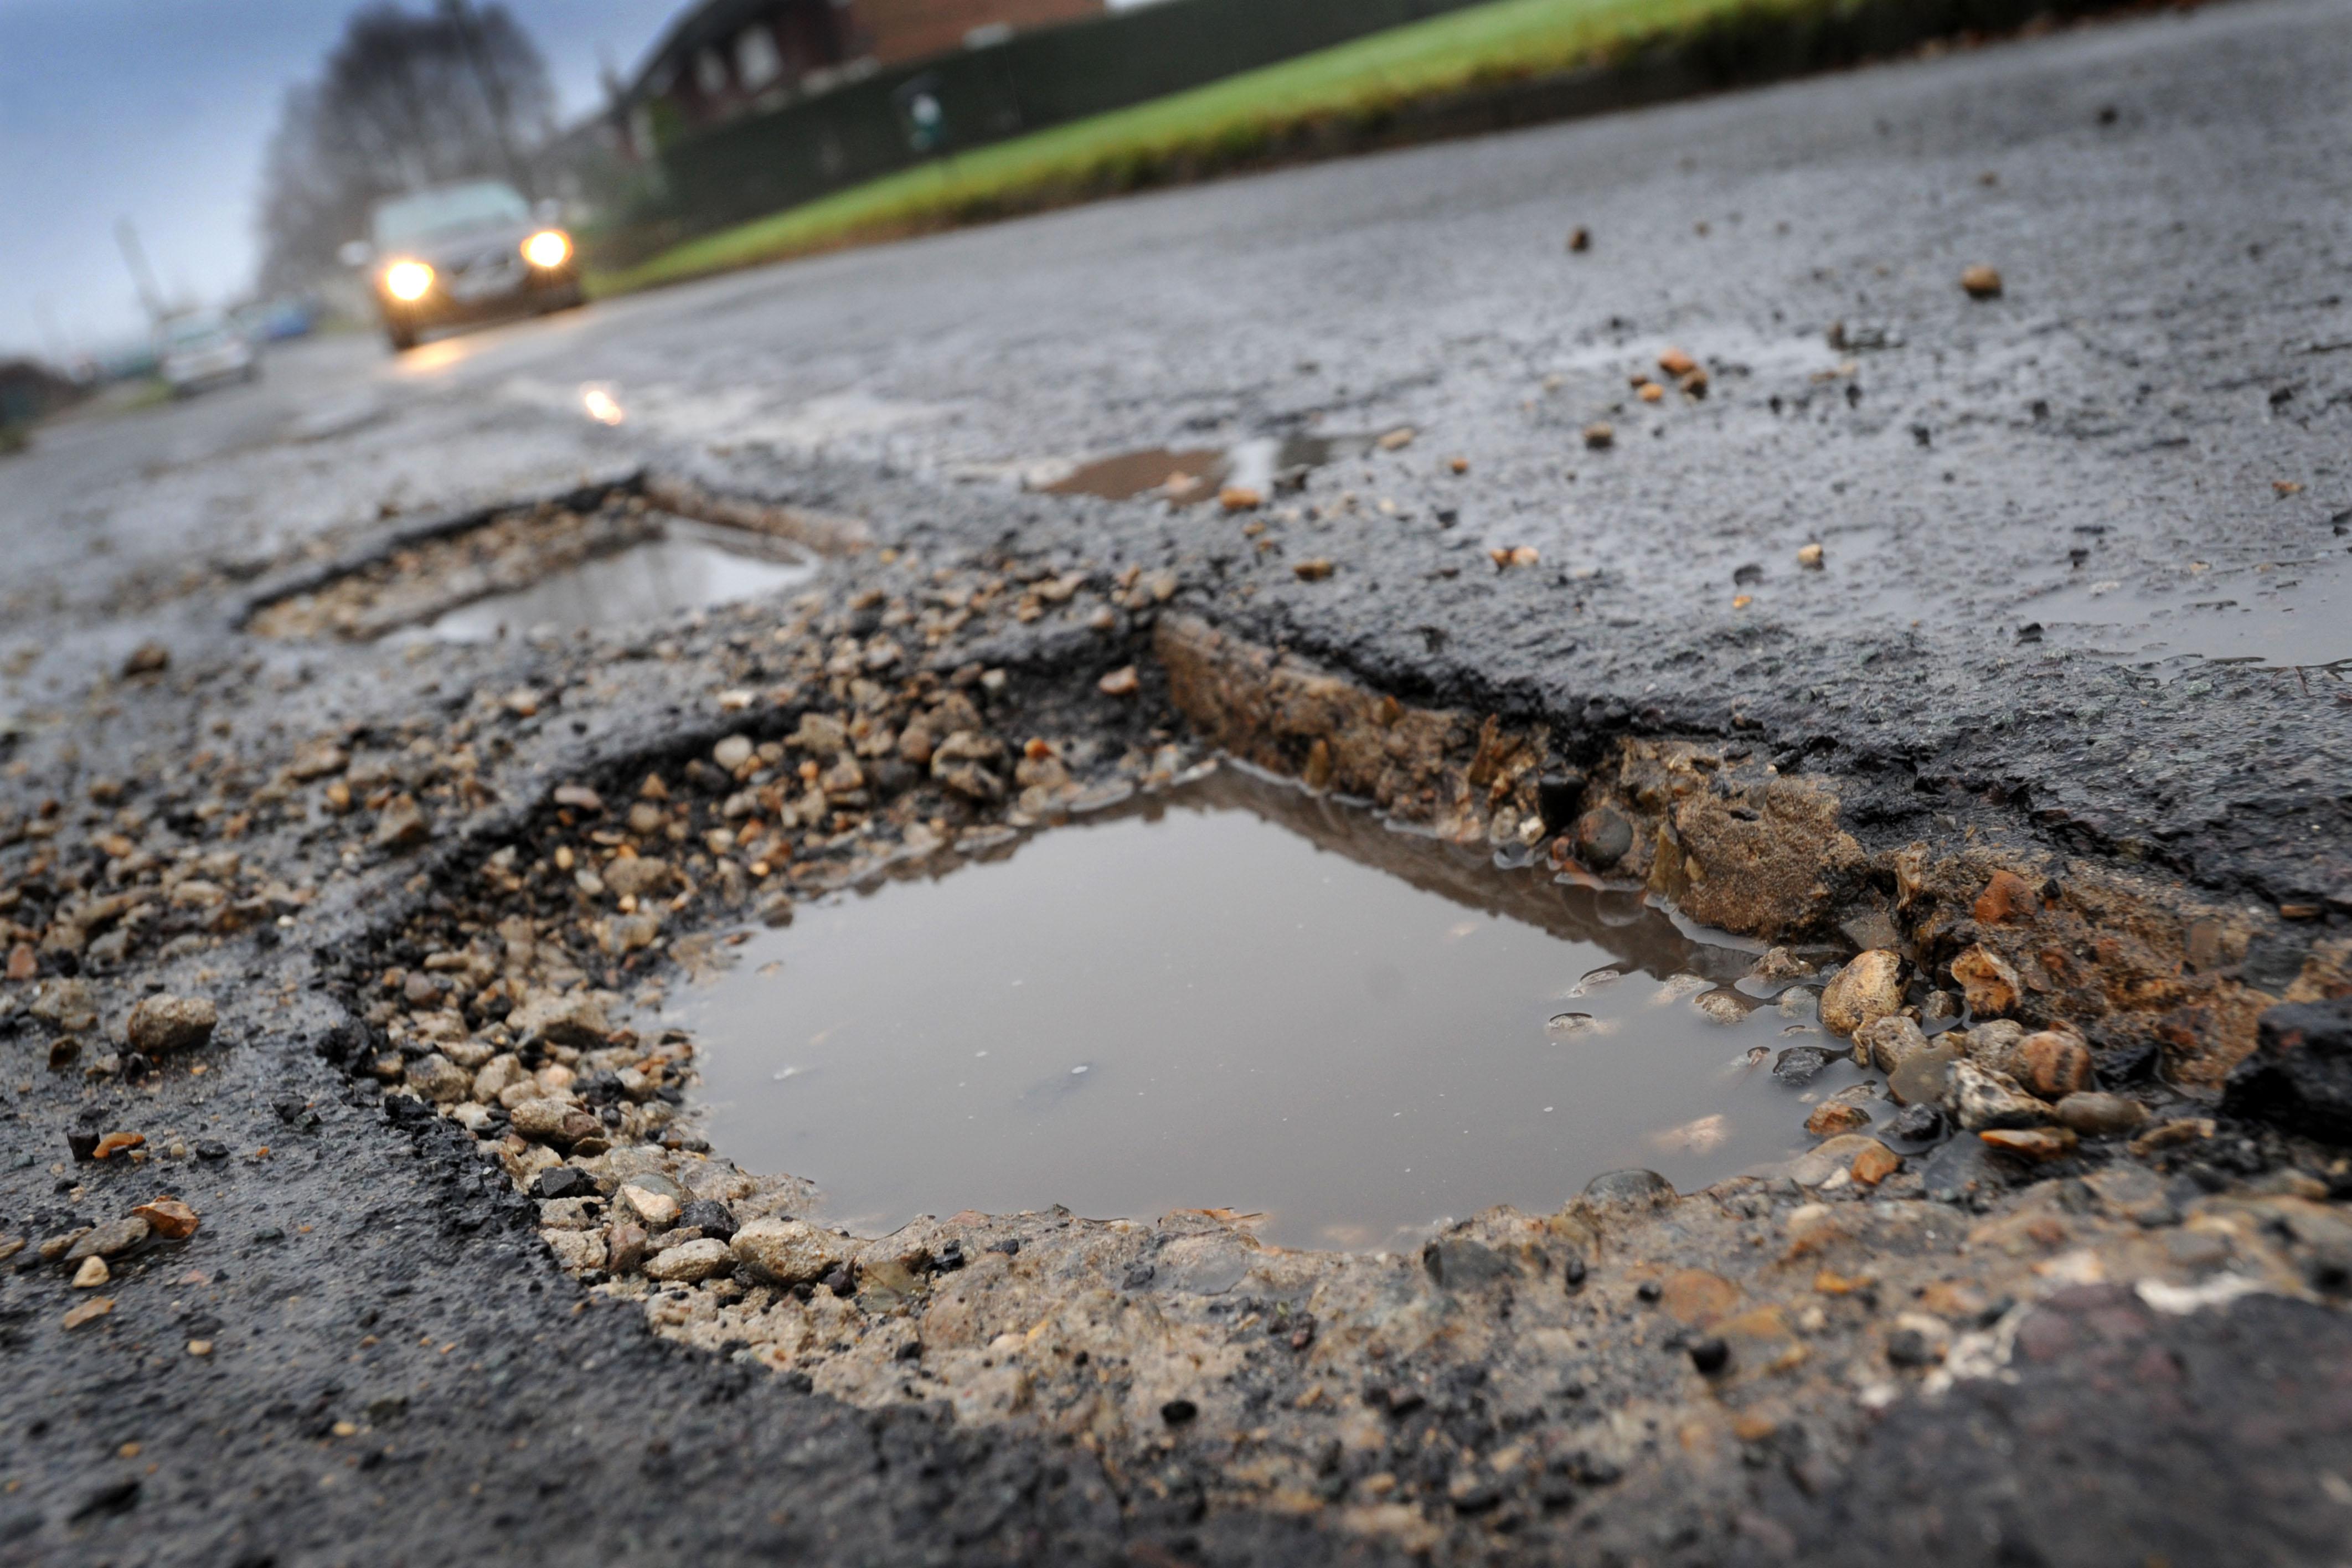 How to File a Pothole Claim With Your City